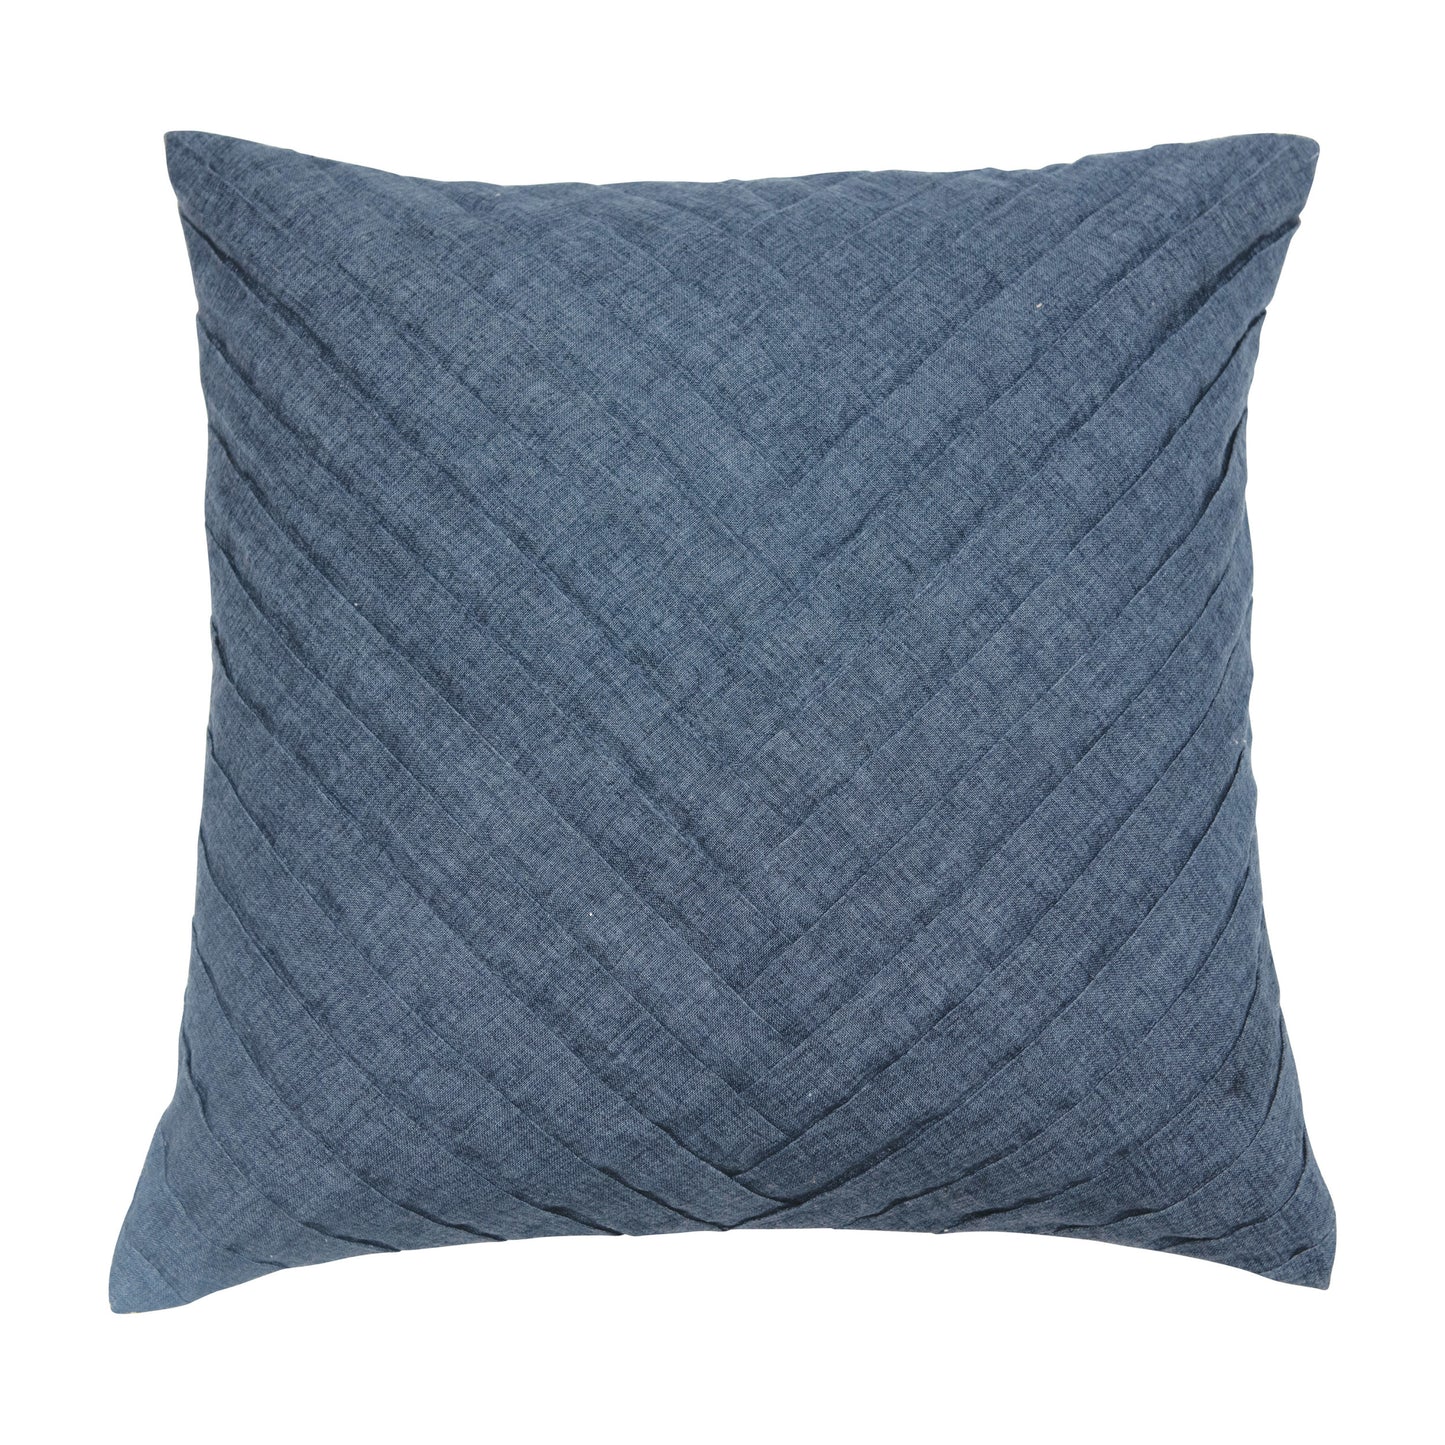 Square Stitched Fabric Pillow